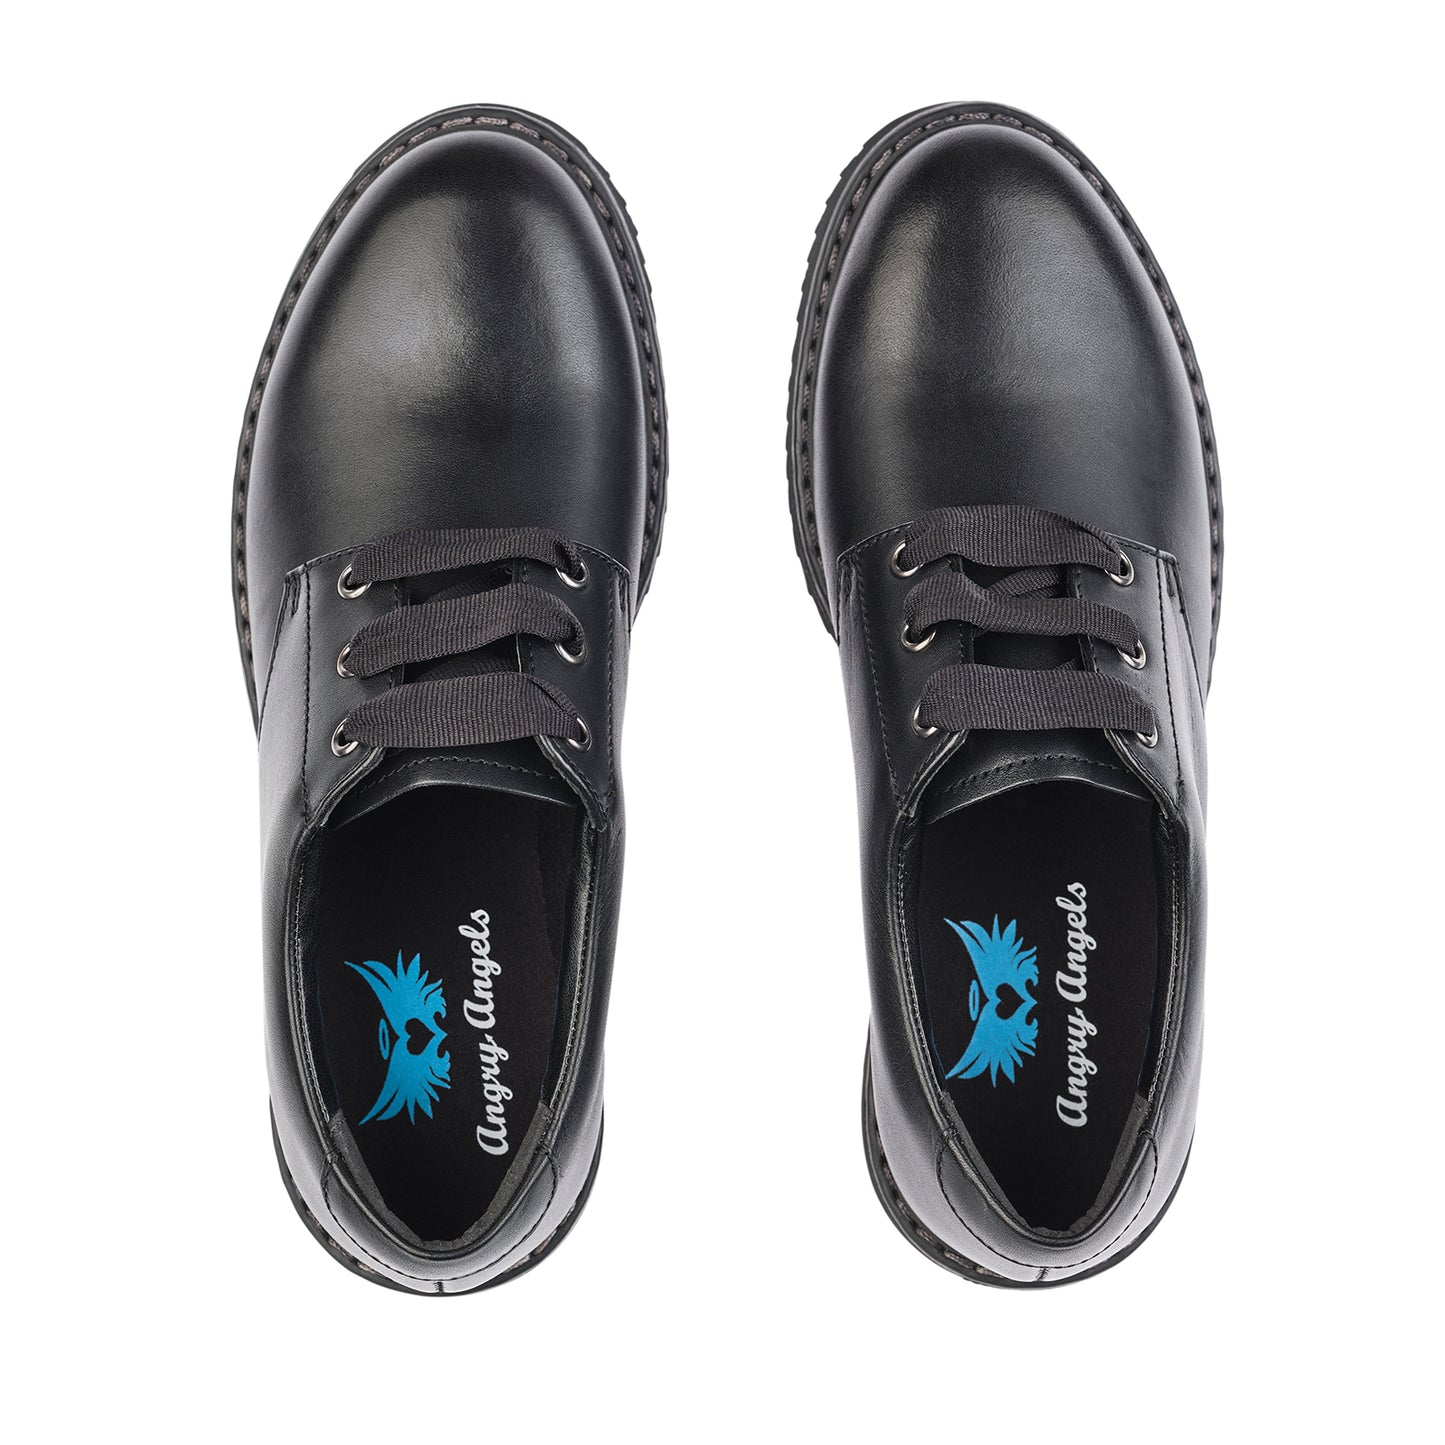 Impact Black Leather Lace-up Girl's or Boy's School Shoe